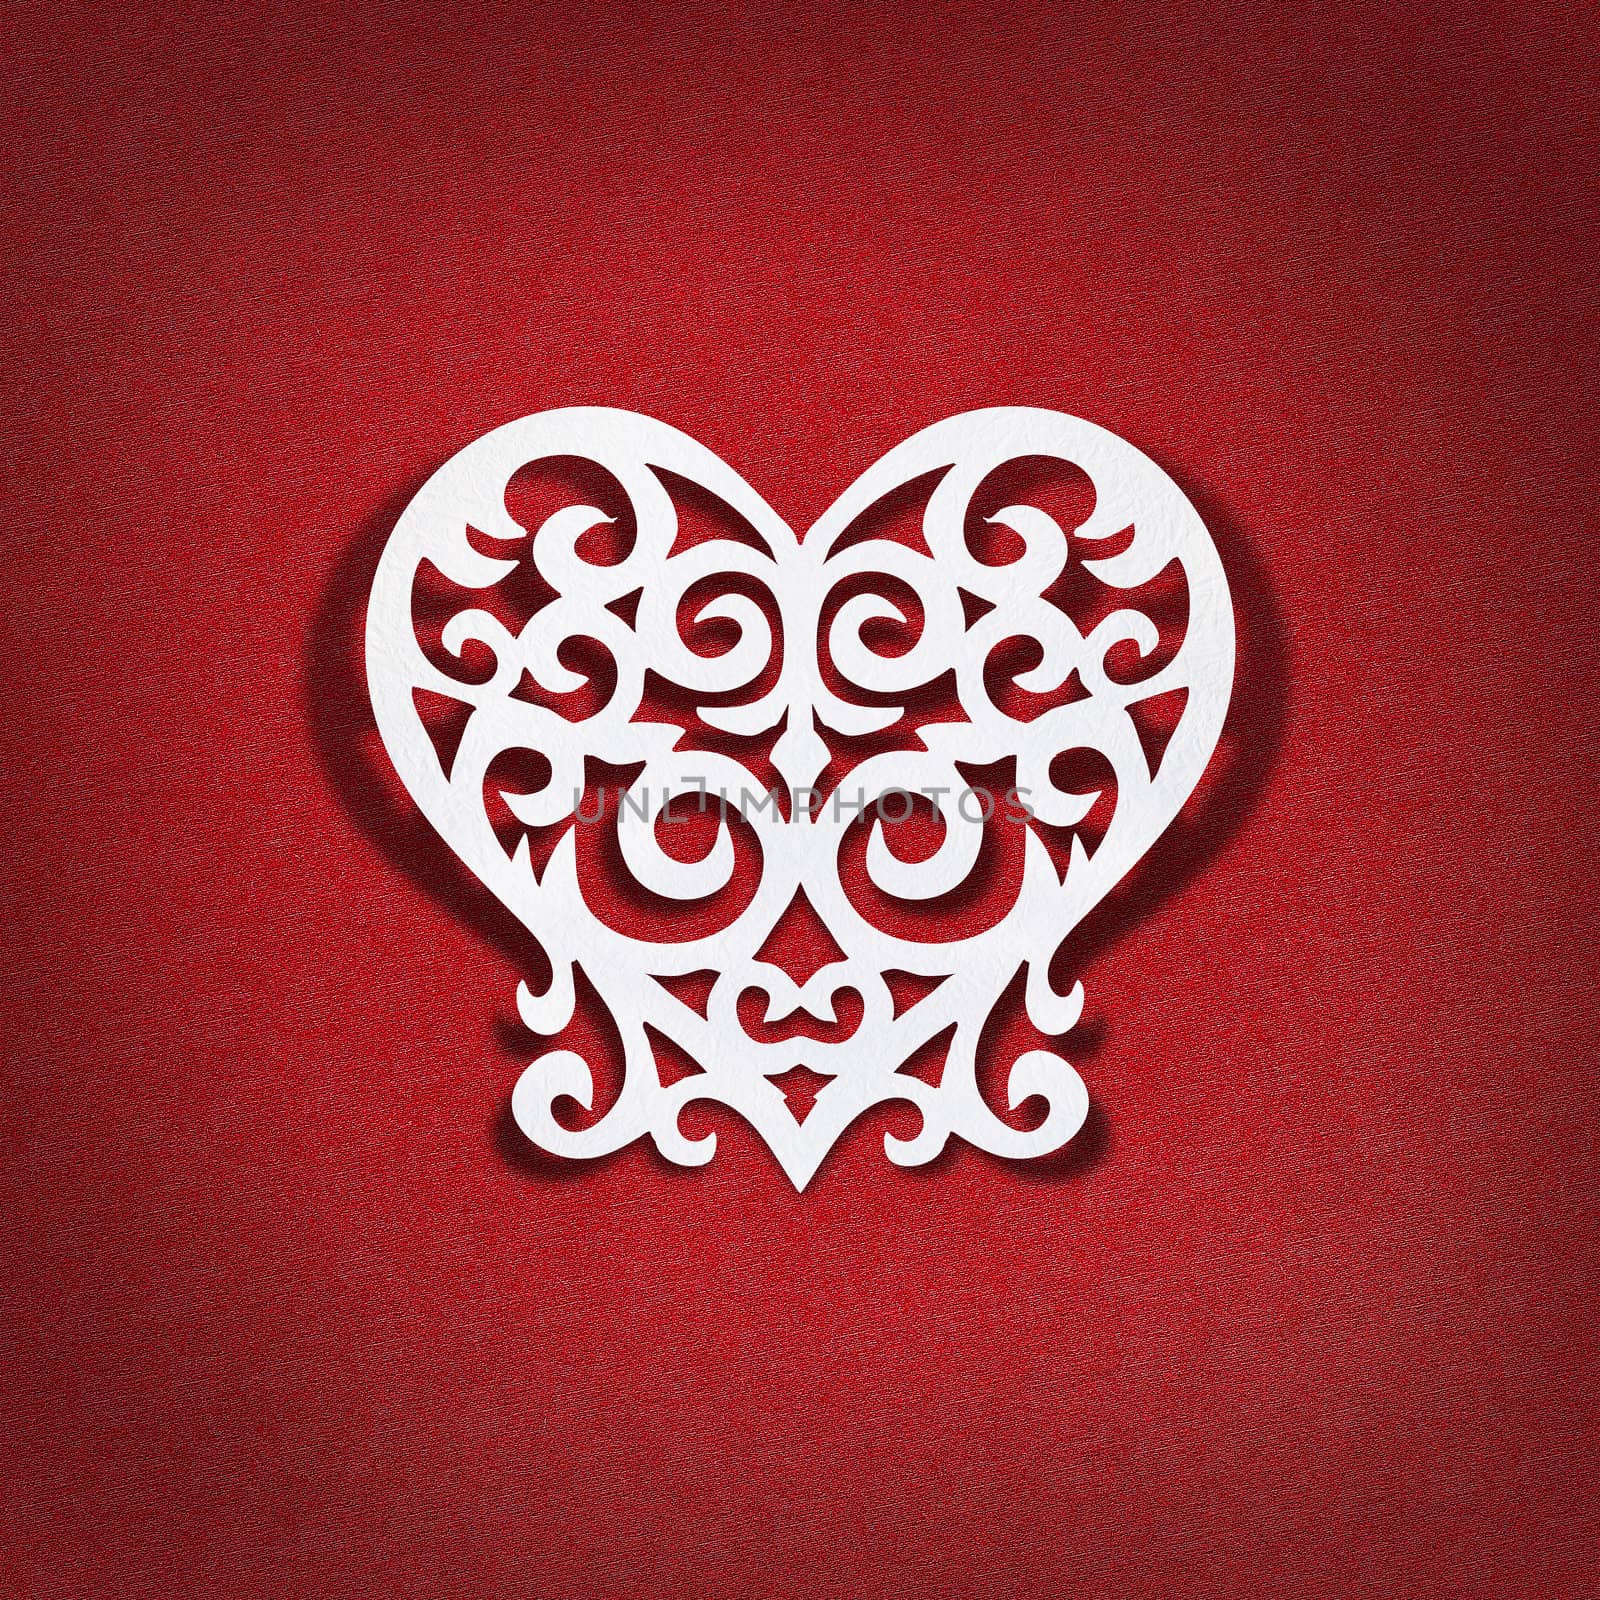 the heart of the white paper on red background